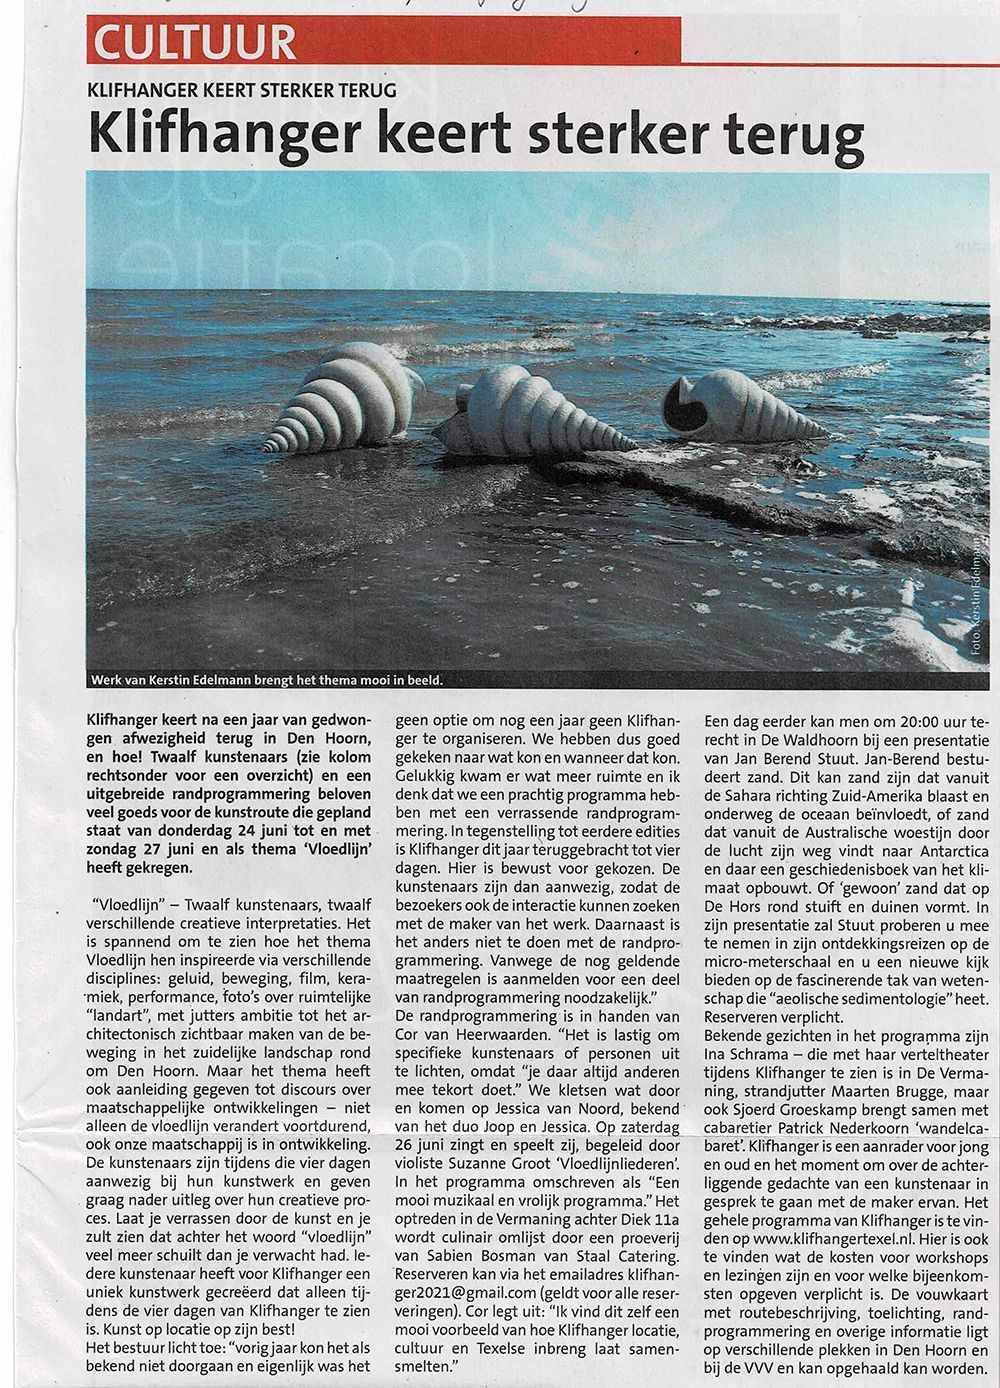 Texelse Courant 18.06.21